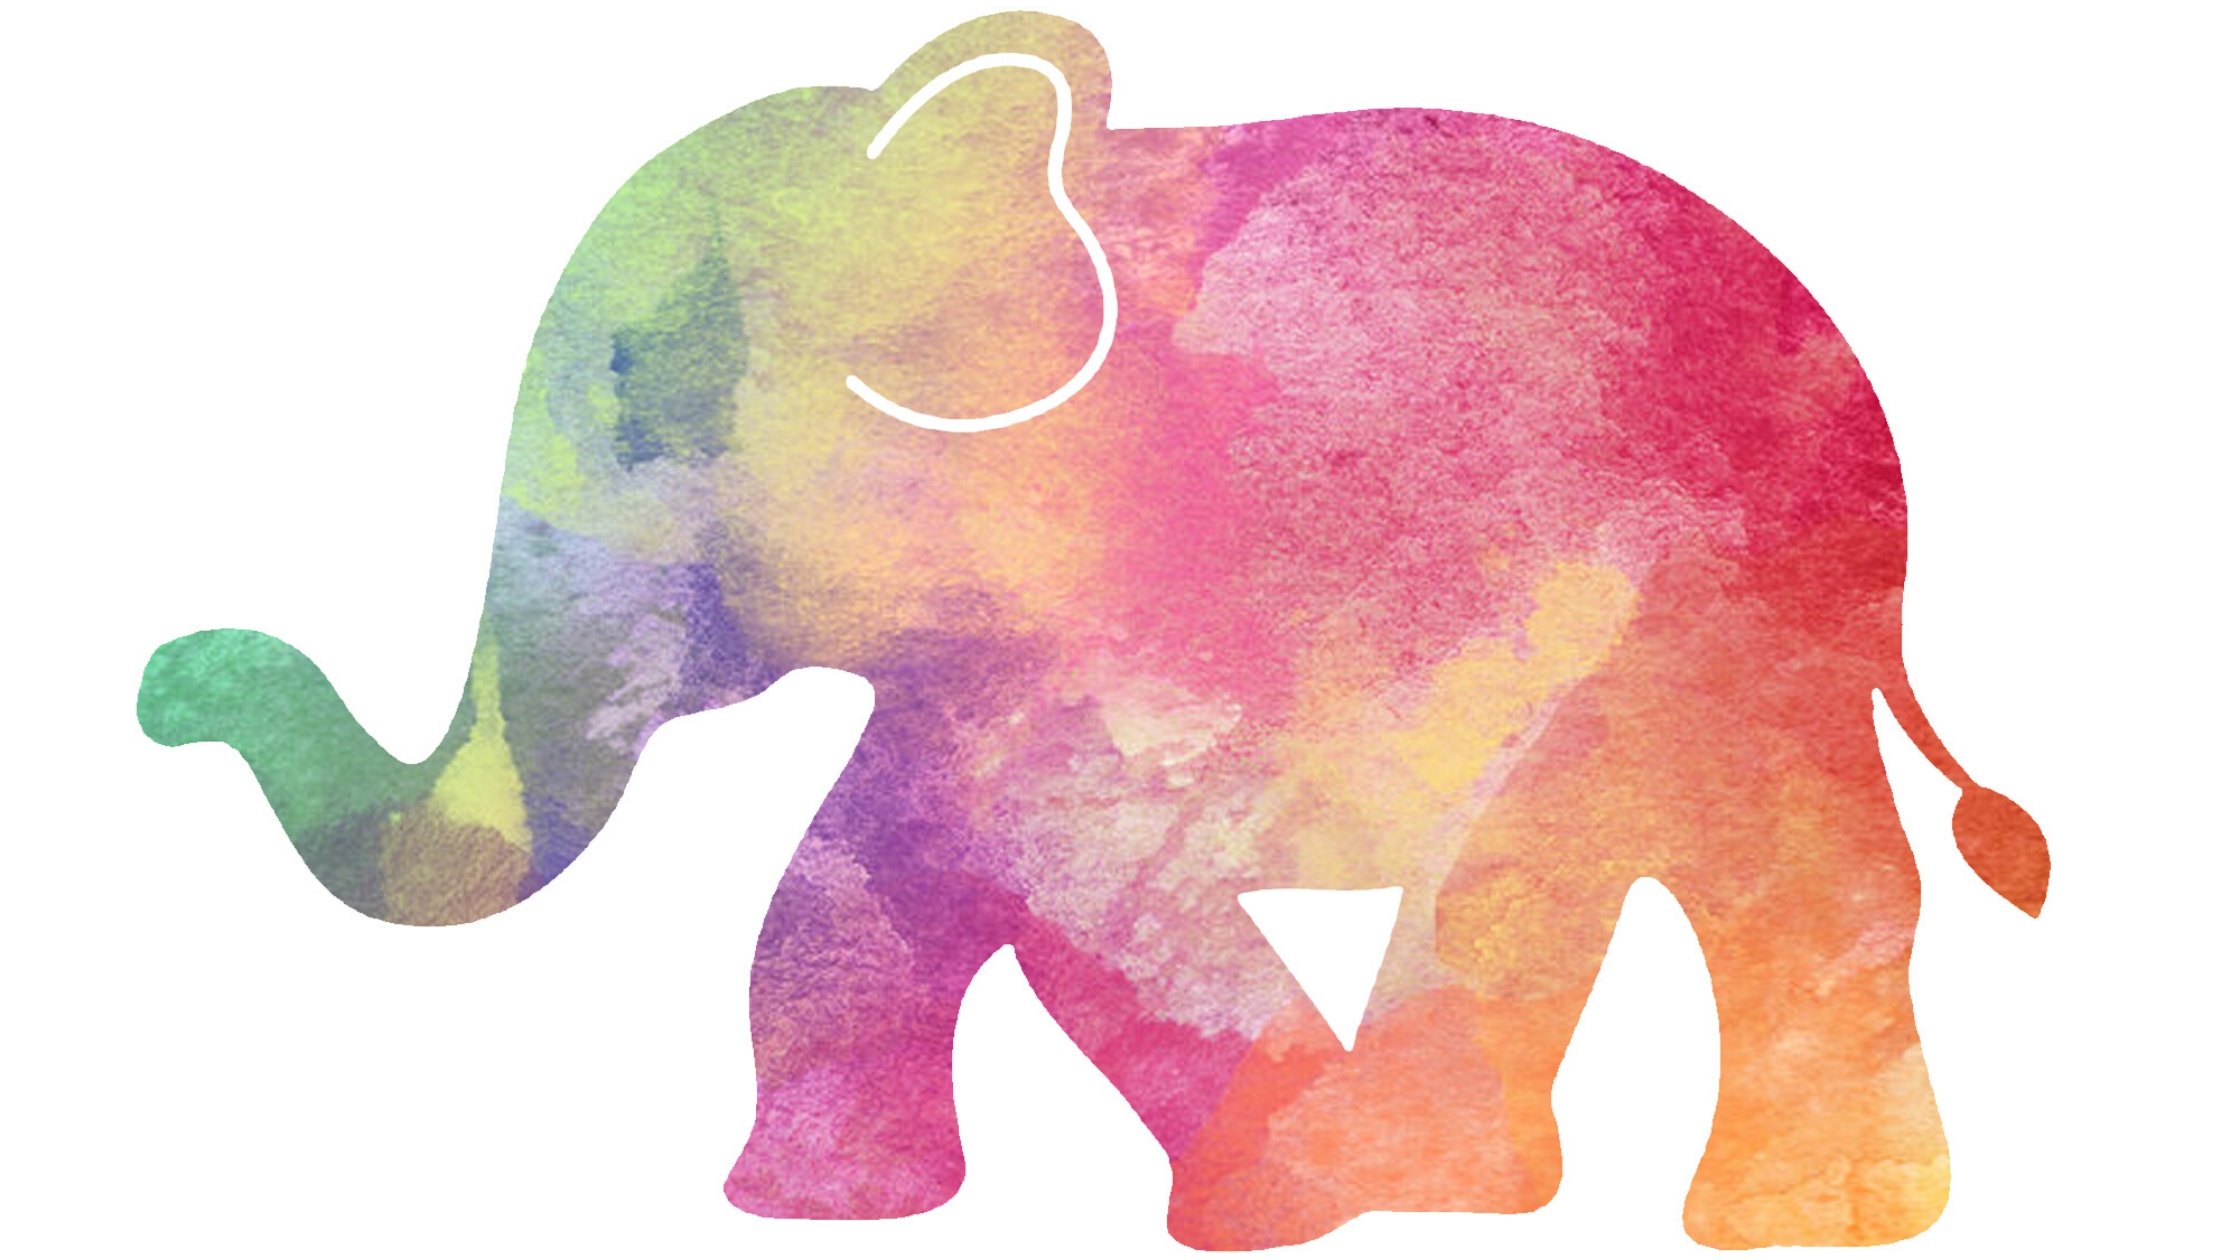 Connecting with Customers via the Elephant in the Room